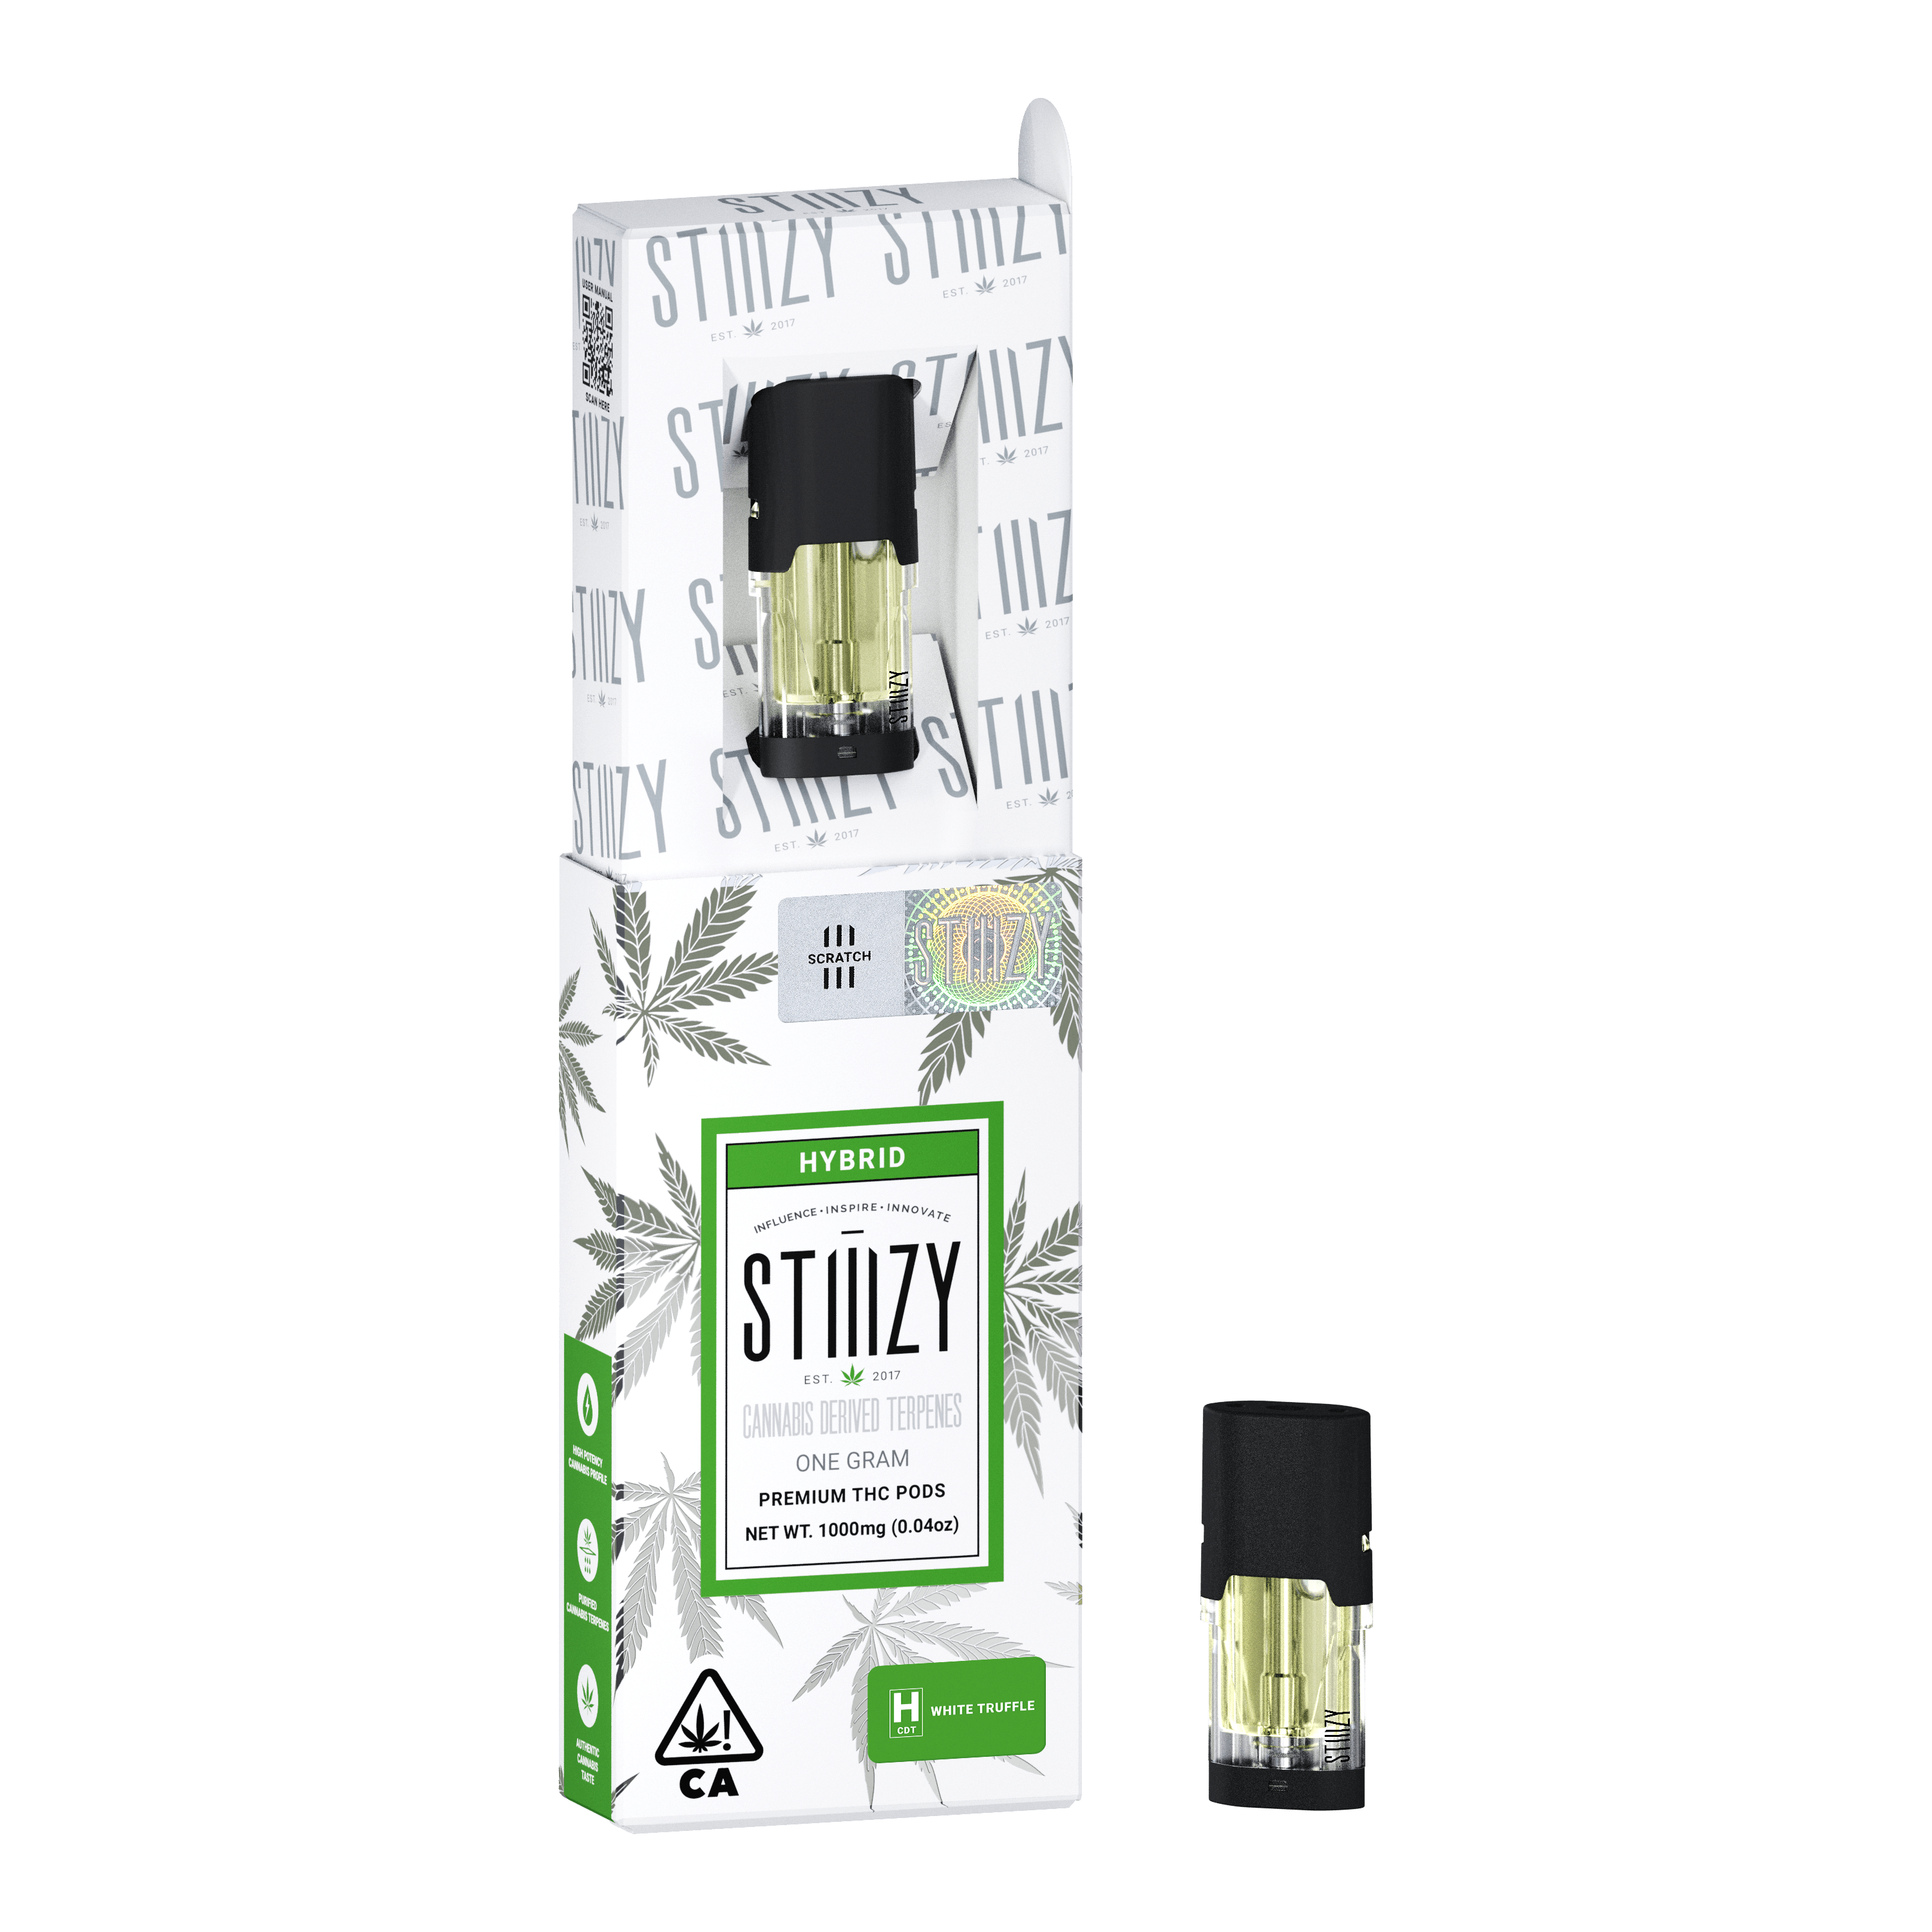 Weed vape pods with cannabis-derived terpenes from the White Truffle strain sit inside and outside of their white and green box.